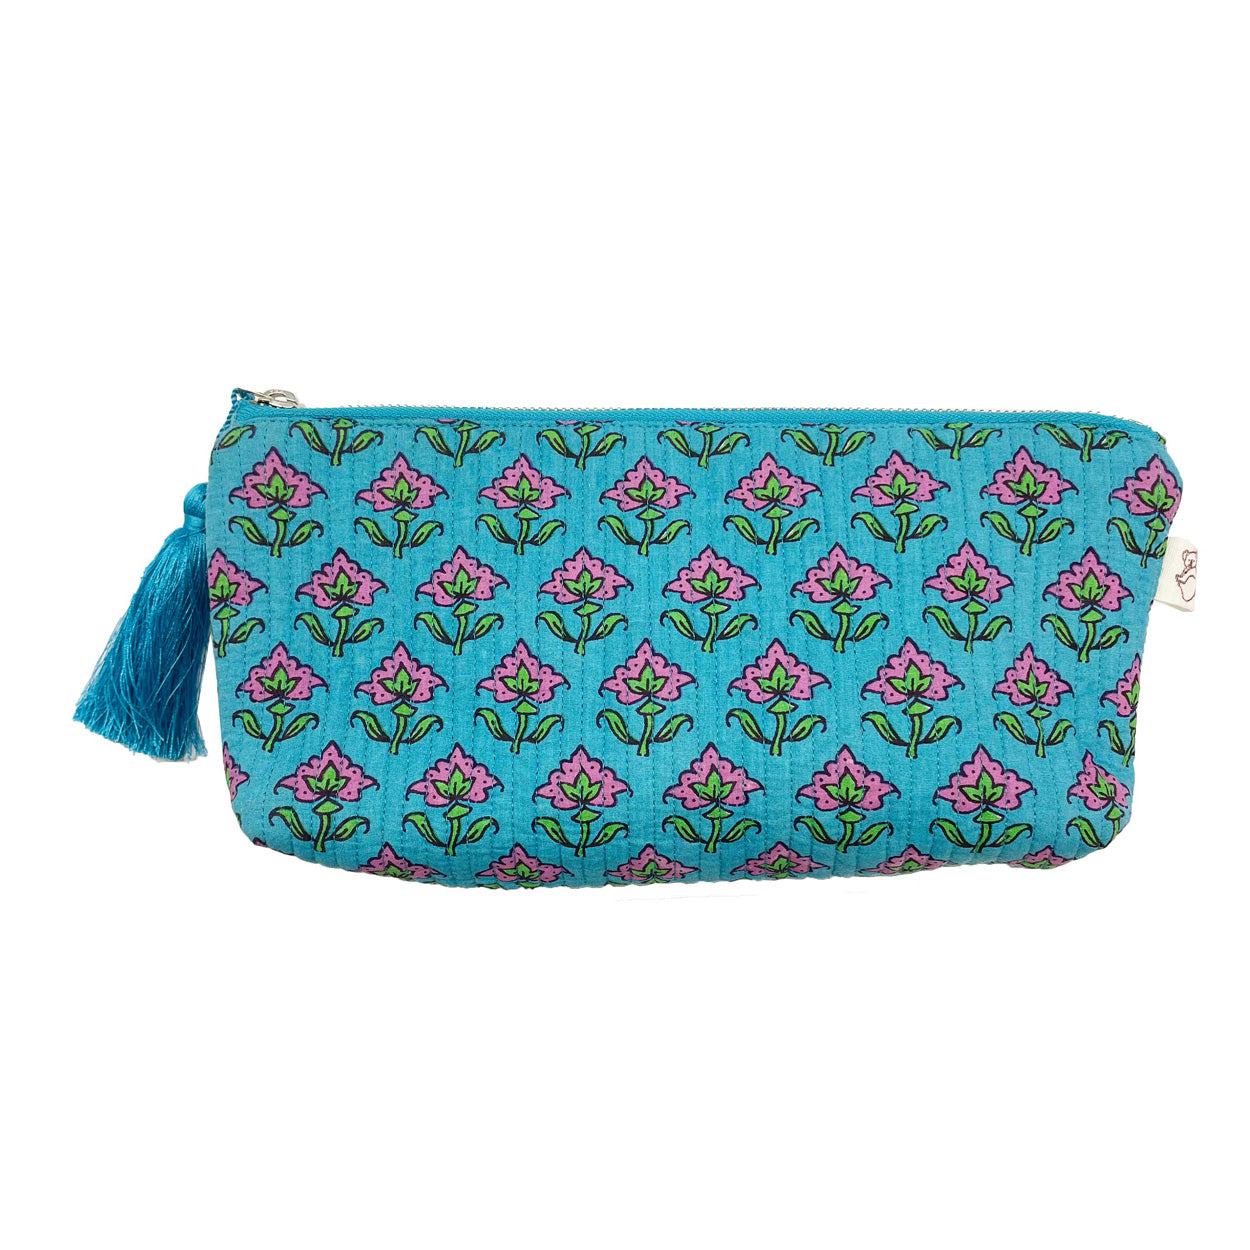 Hold Me Clutch - Quilted Blue Floral  Just $28.80 with code GETHAPPY - Quilted Koala